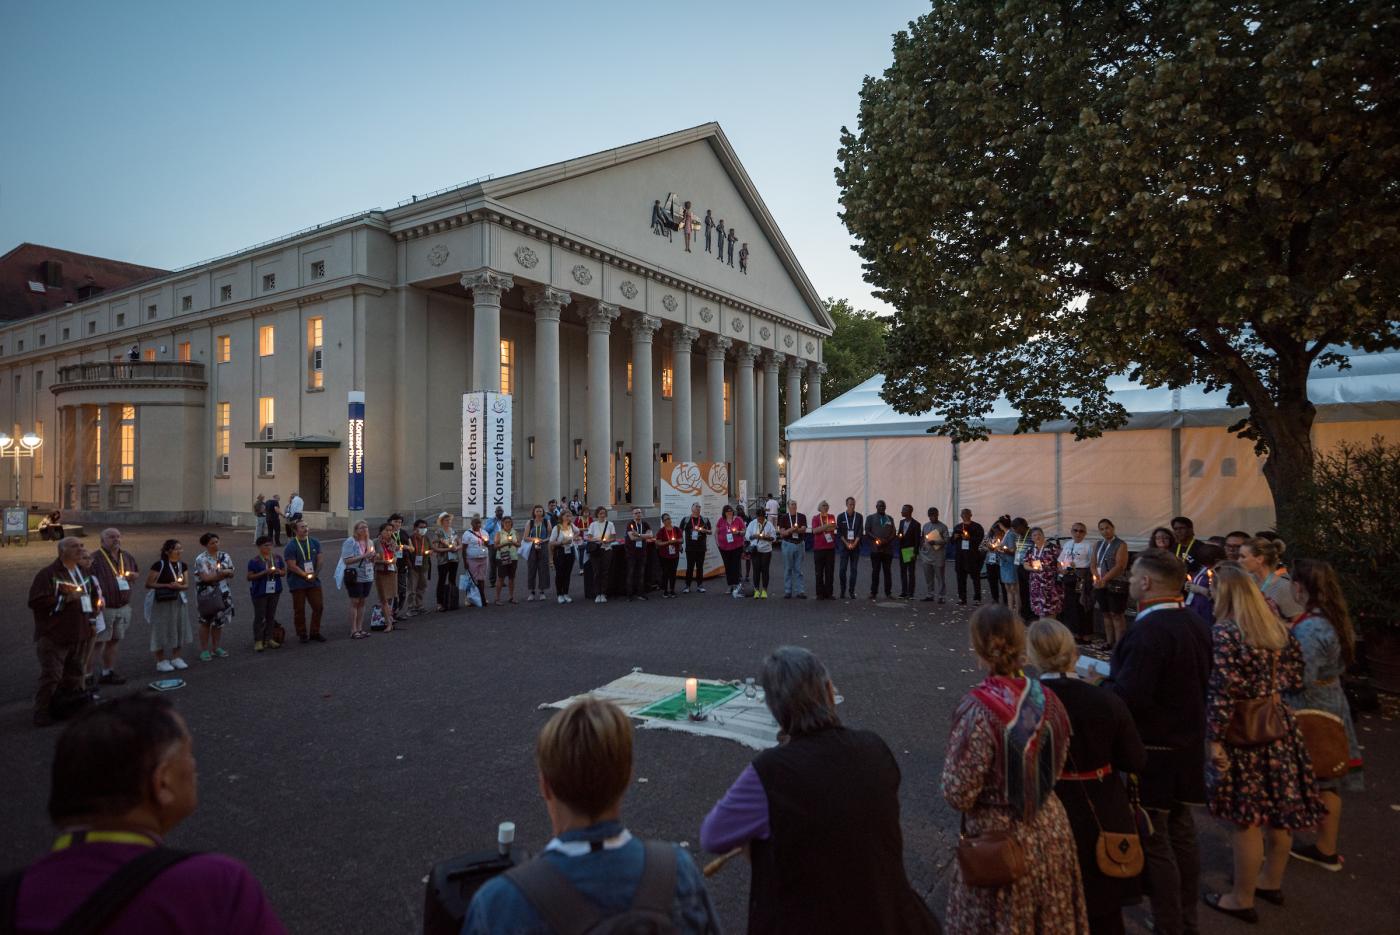 Opening gathering for the Indigenous peoples’ pre-assembly to the World Council of Churches 11th Assembly. The Assembly is held in Karlsruhe, Germany from 31 August to 8 September, under the theme "Christ's Love Moves the World to Reconciliation and Unity", Photo: Albin Hillert/WCC